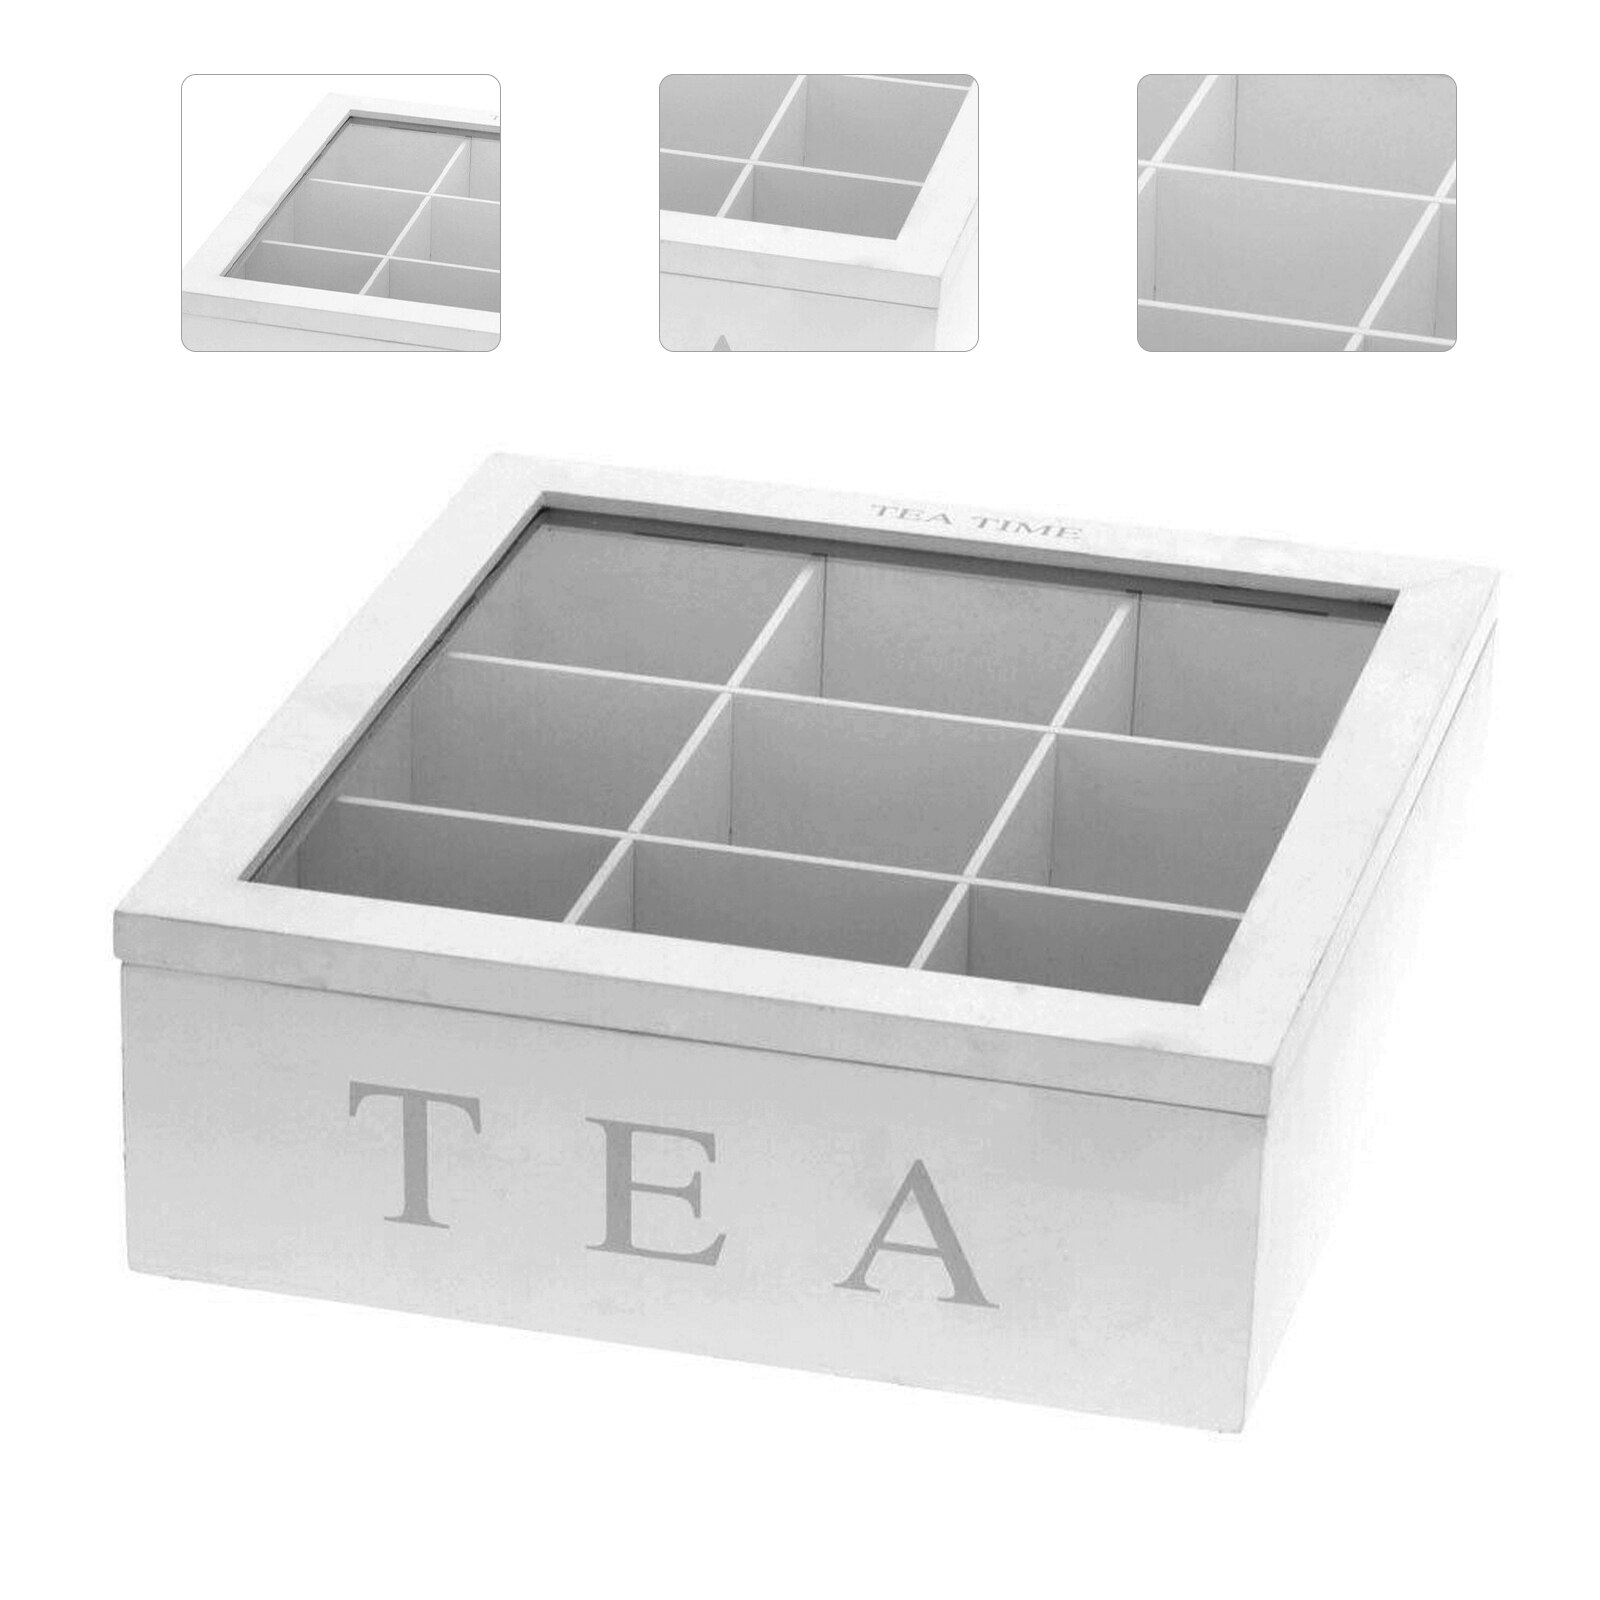 Wooden Tea Box With Lid 9-Compartment Retro Style Coffee Tea Bag Storage Holder Organizer For Kitchen Cabinets home Kitchen